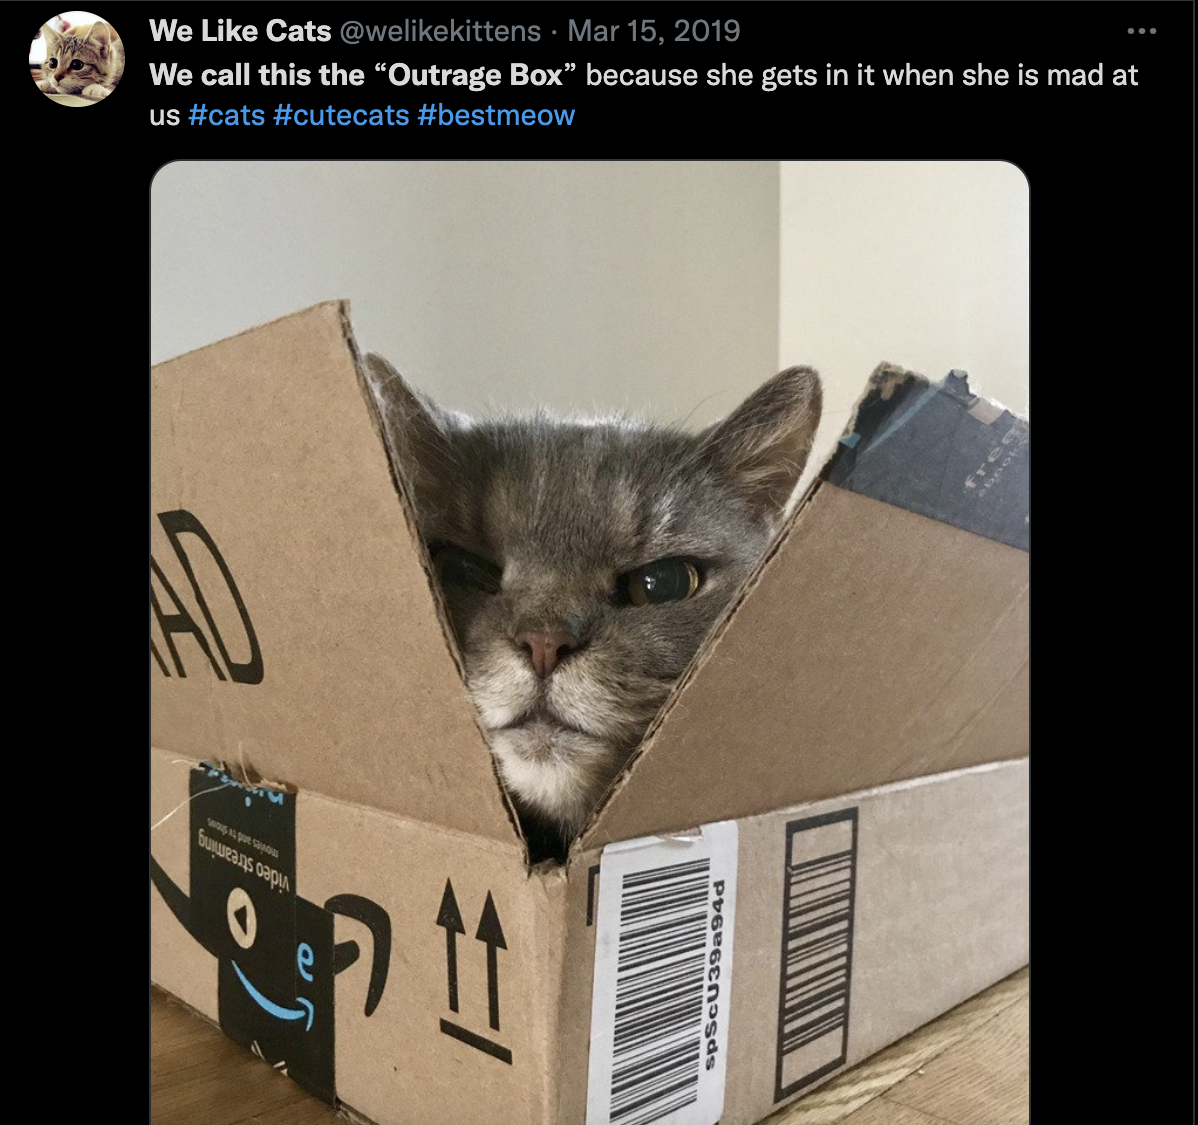 cat memes reddit - We Cats . We call this the "Outrage Box" because she gets in it when she is mad at us A ent